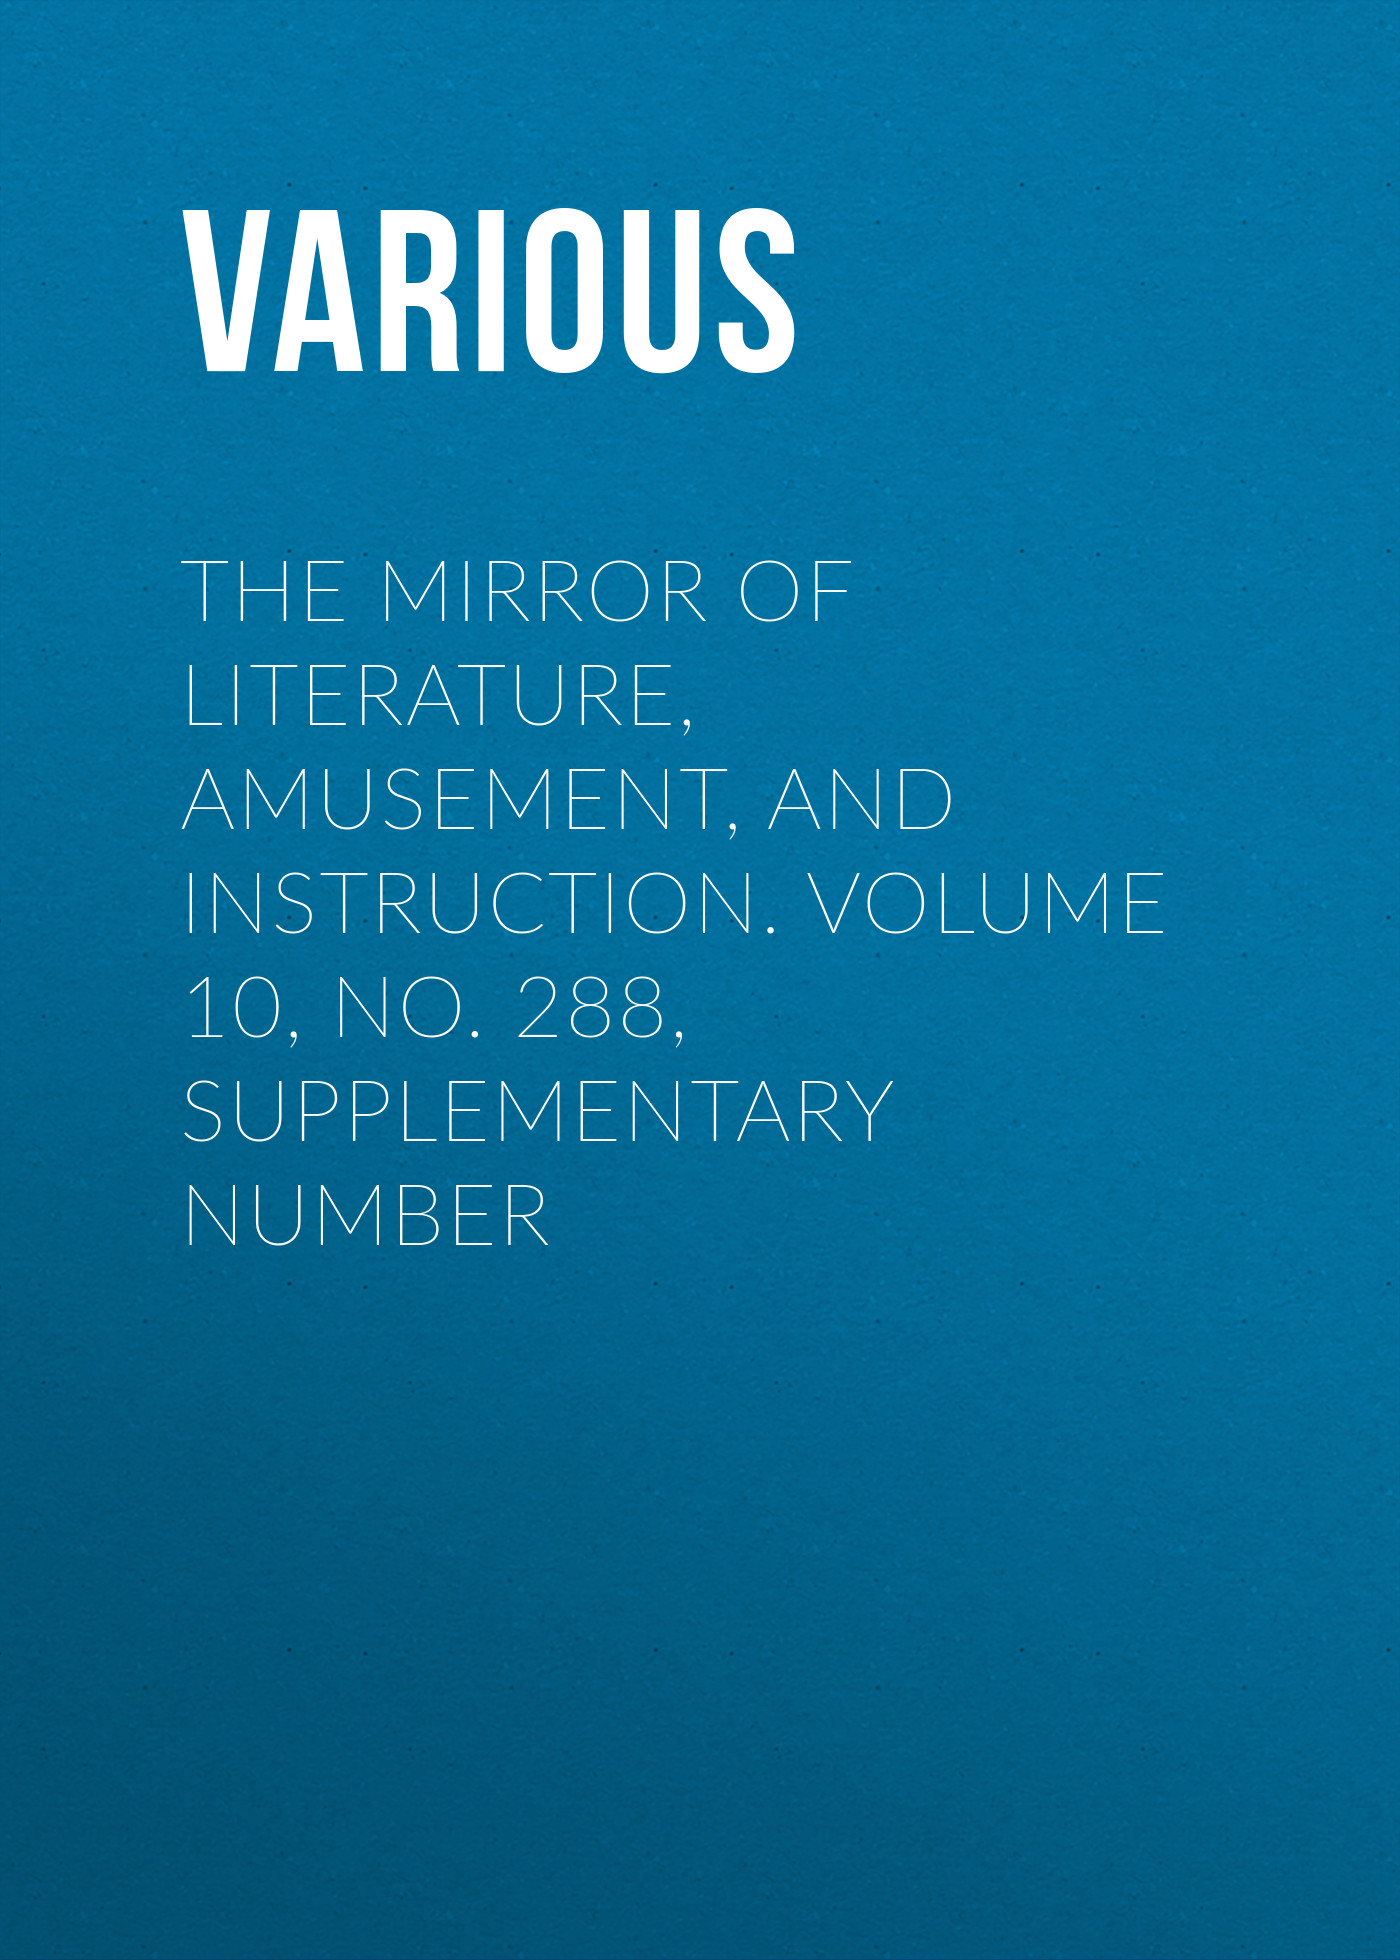 The Mirror of Literature, Amusement, and Instruction. Volume 10, No. 288, Supplementary Number